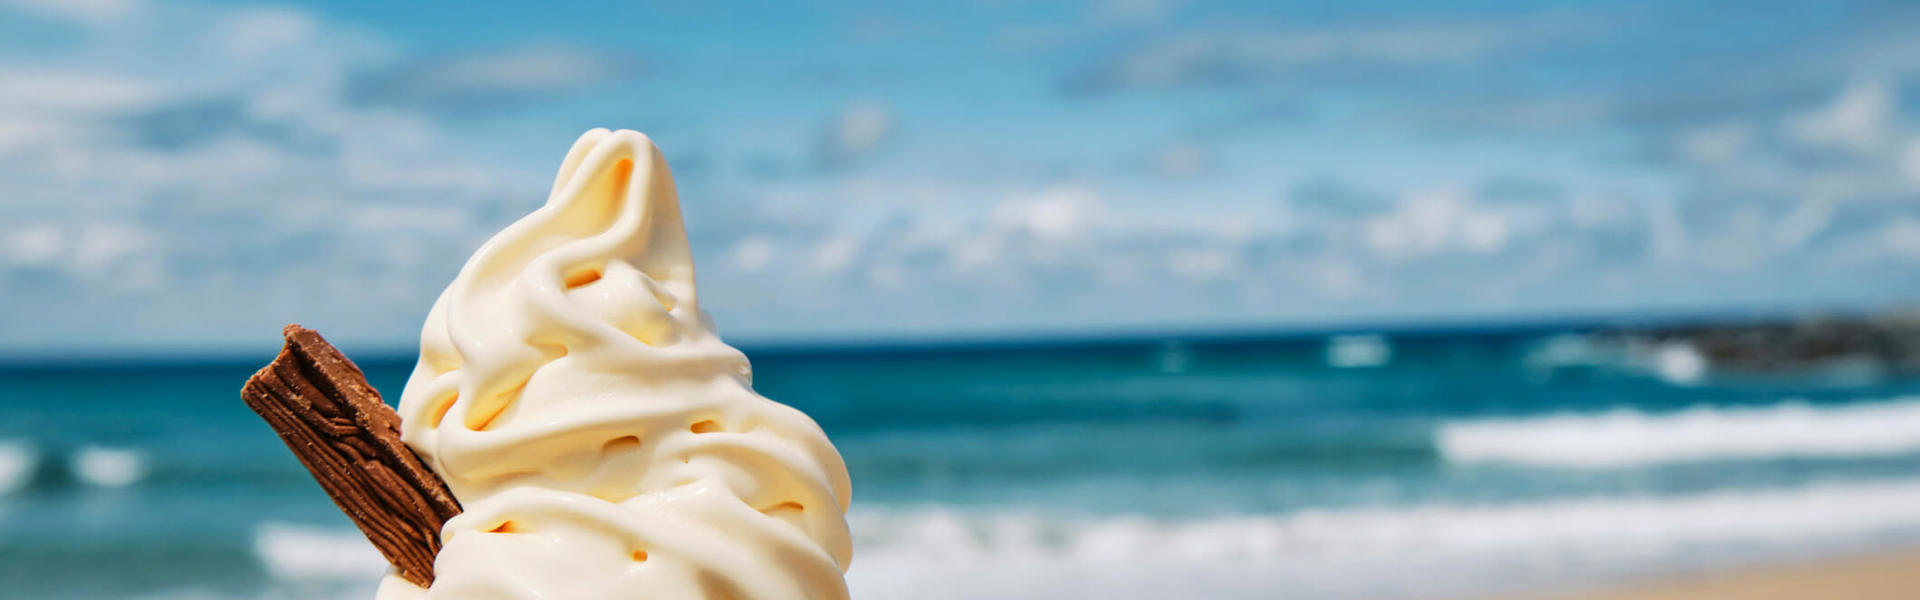 a 99 cone ice cream with a flake against the backdrop of a seaside view